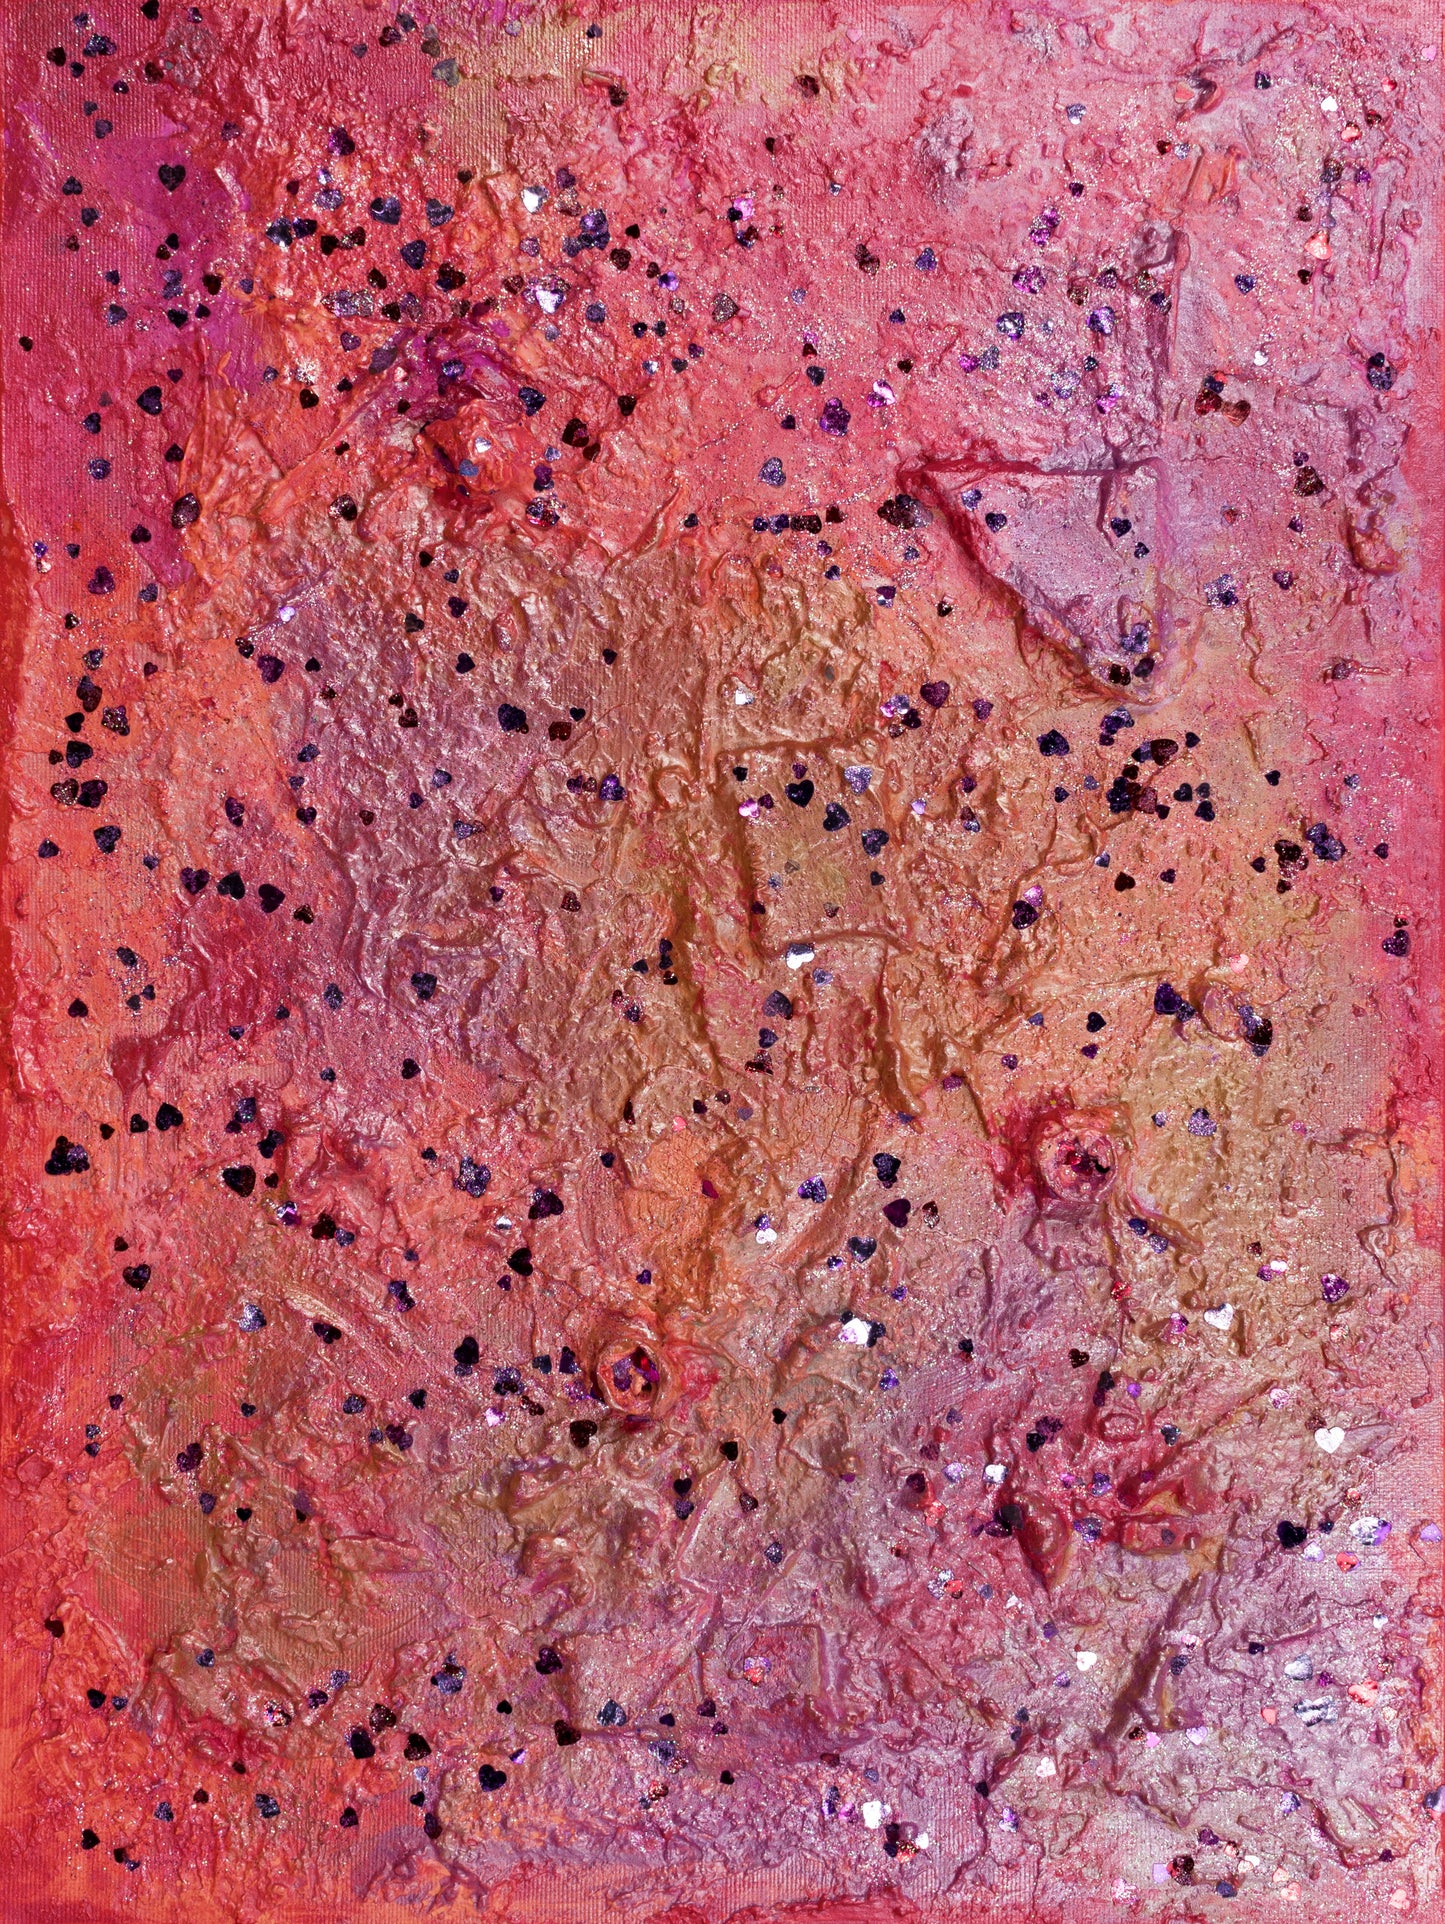 Pink Obsessed : 16" x 35" - 40 x 90 cm